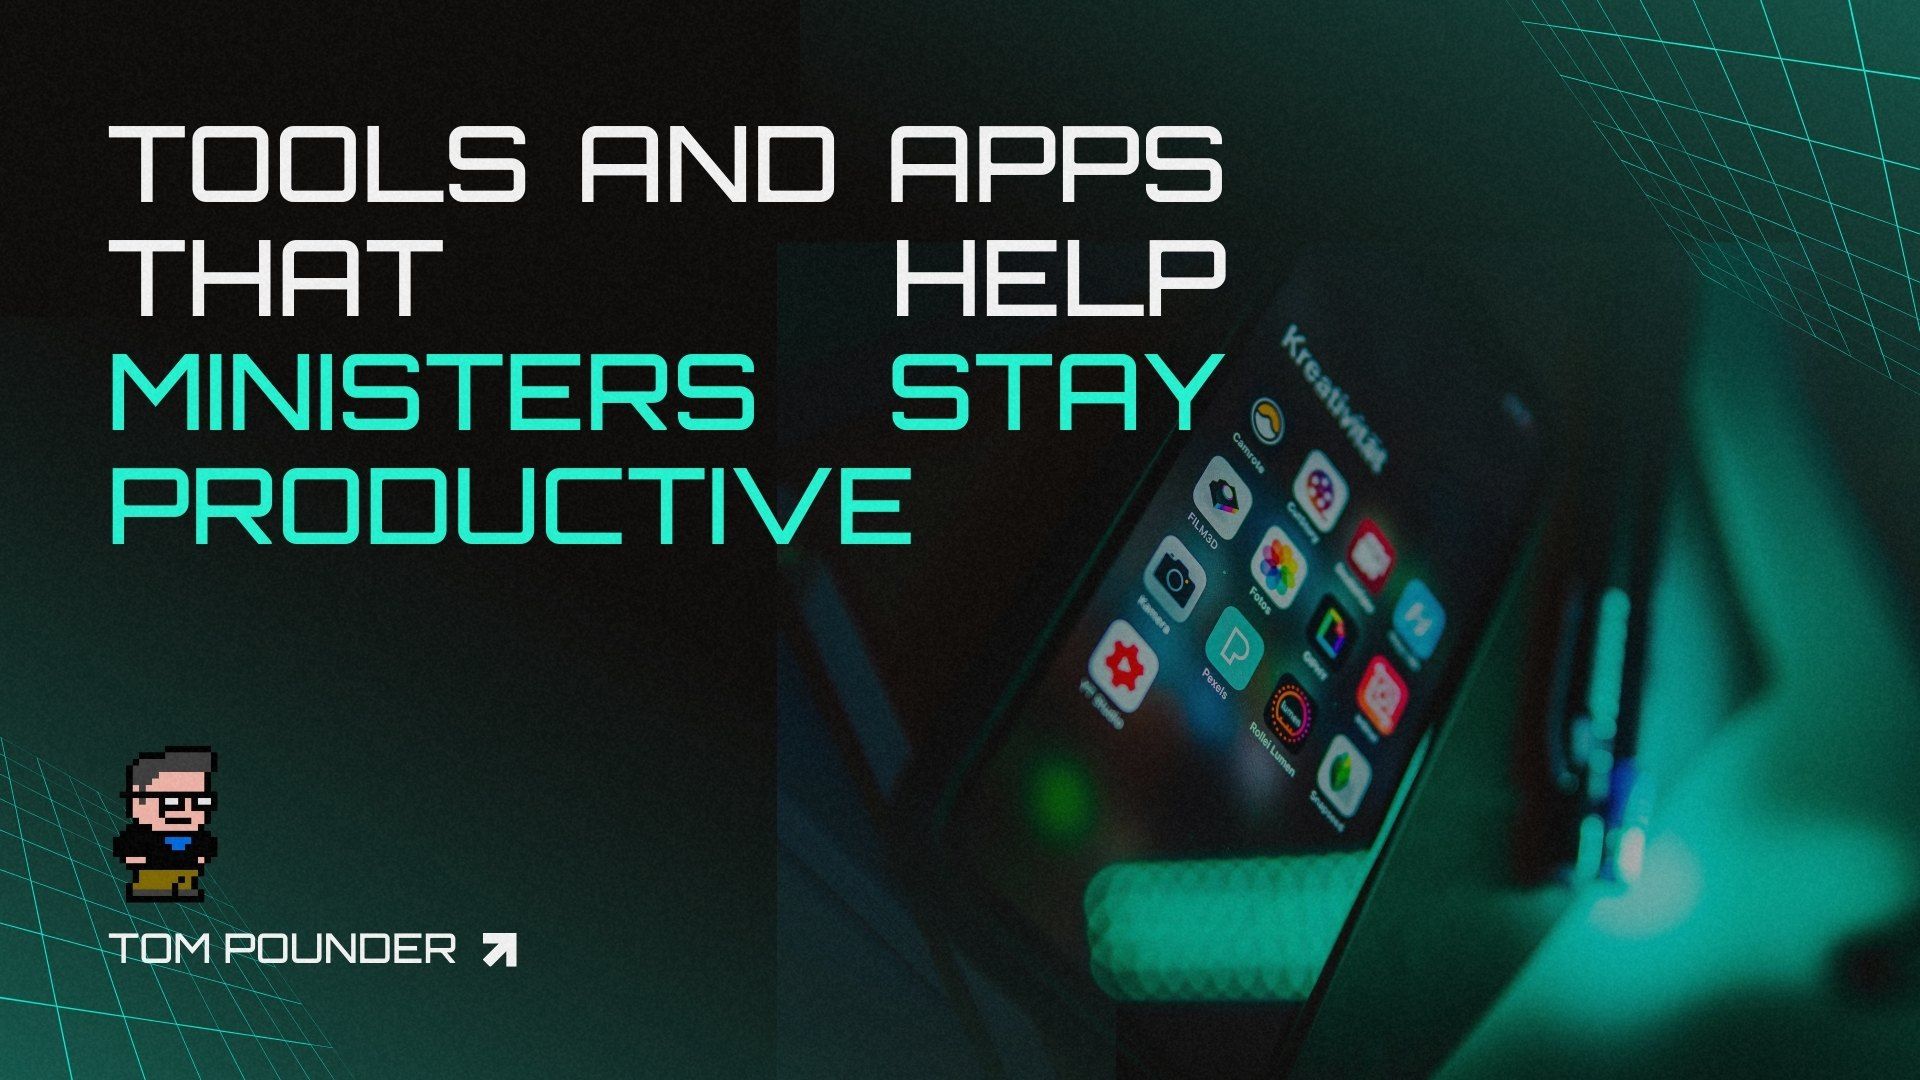 Tools and Apps that Help Ministers Stay Productive